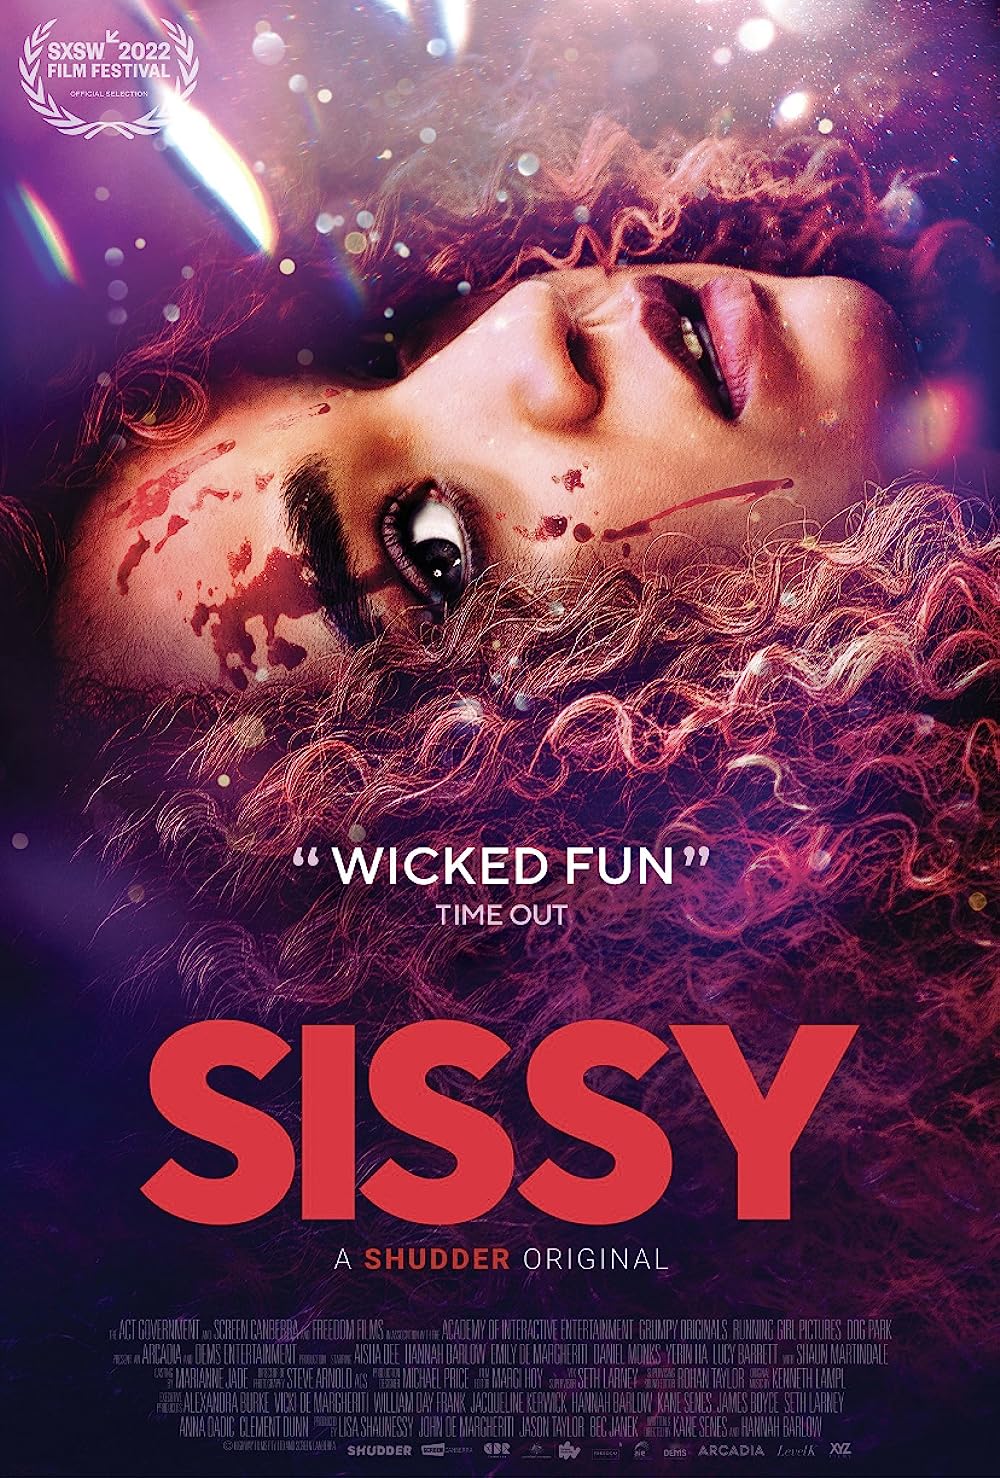 Sissy. Foley and Sound Effects completed by Infidel Studios